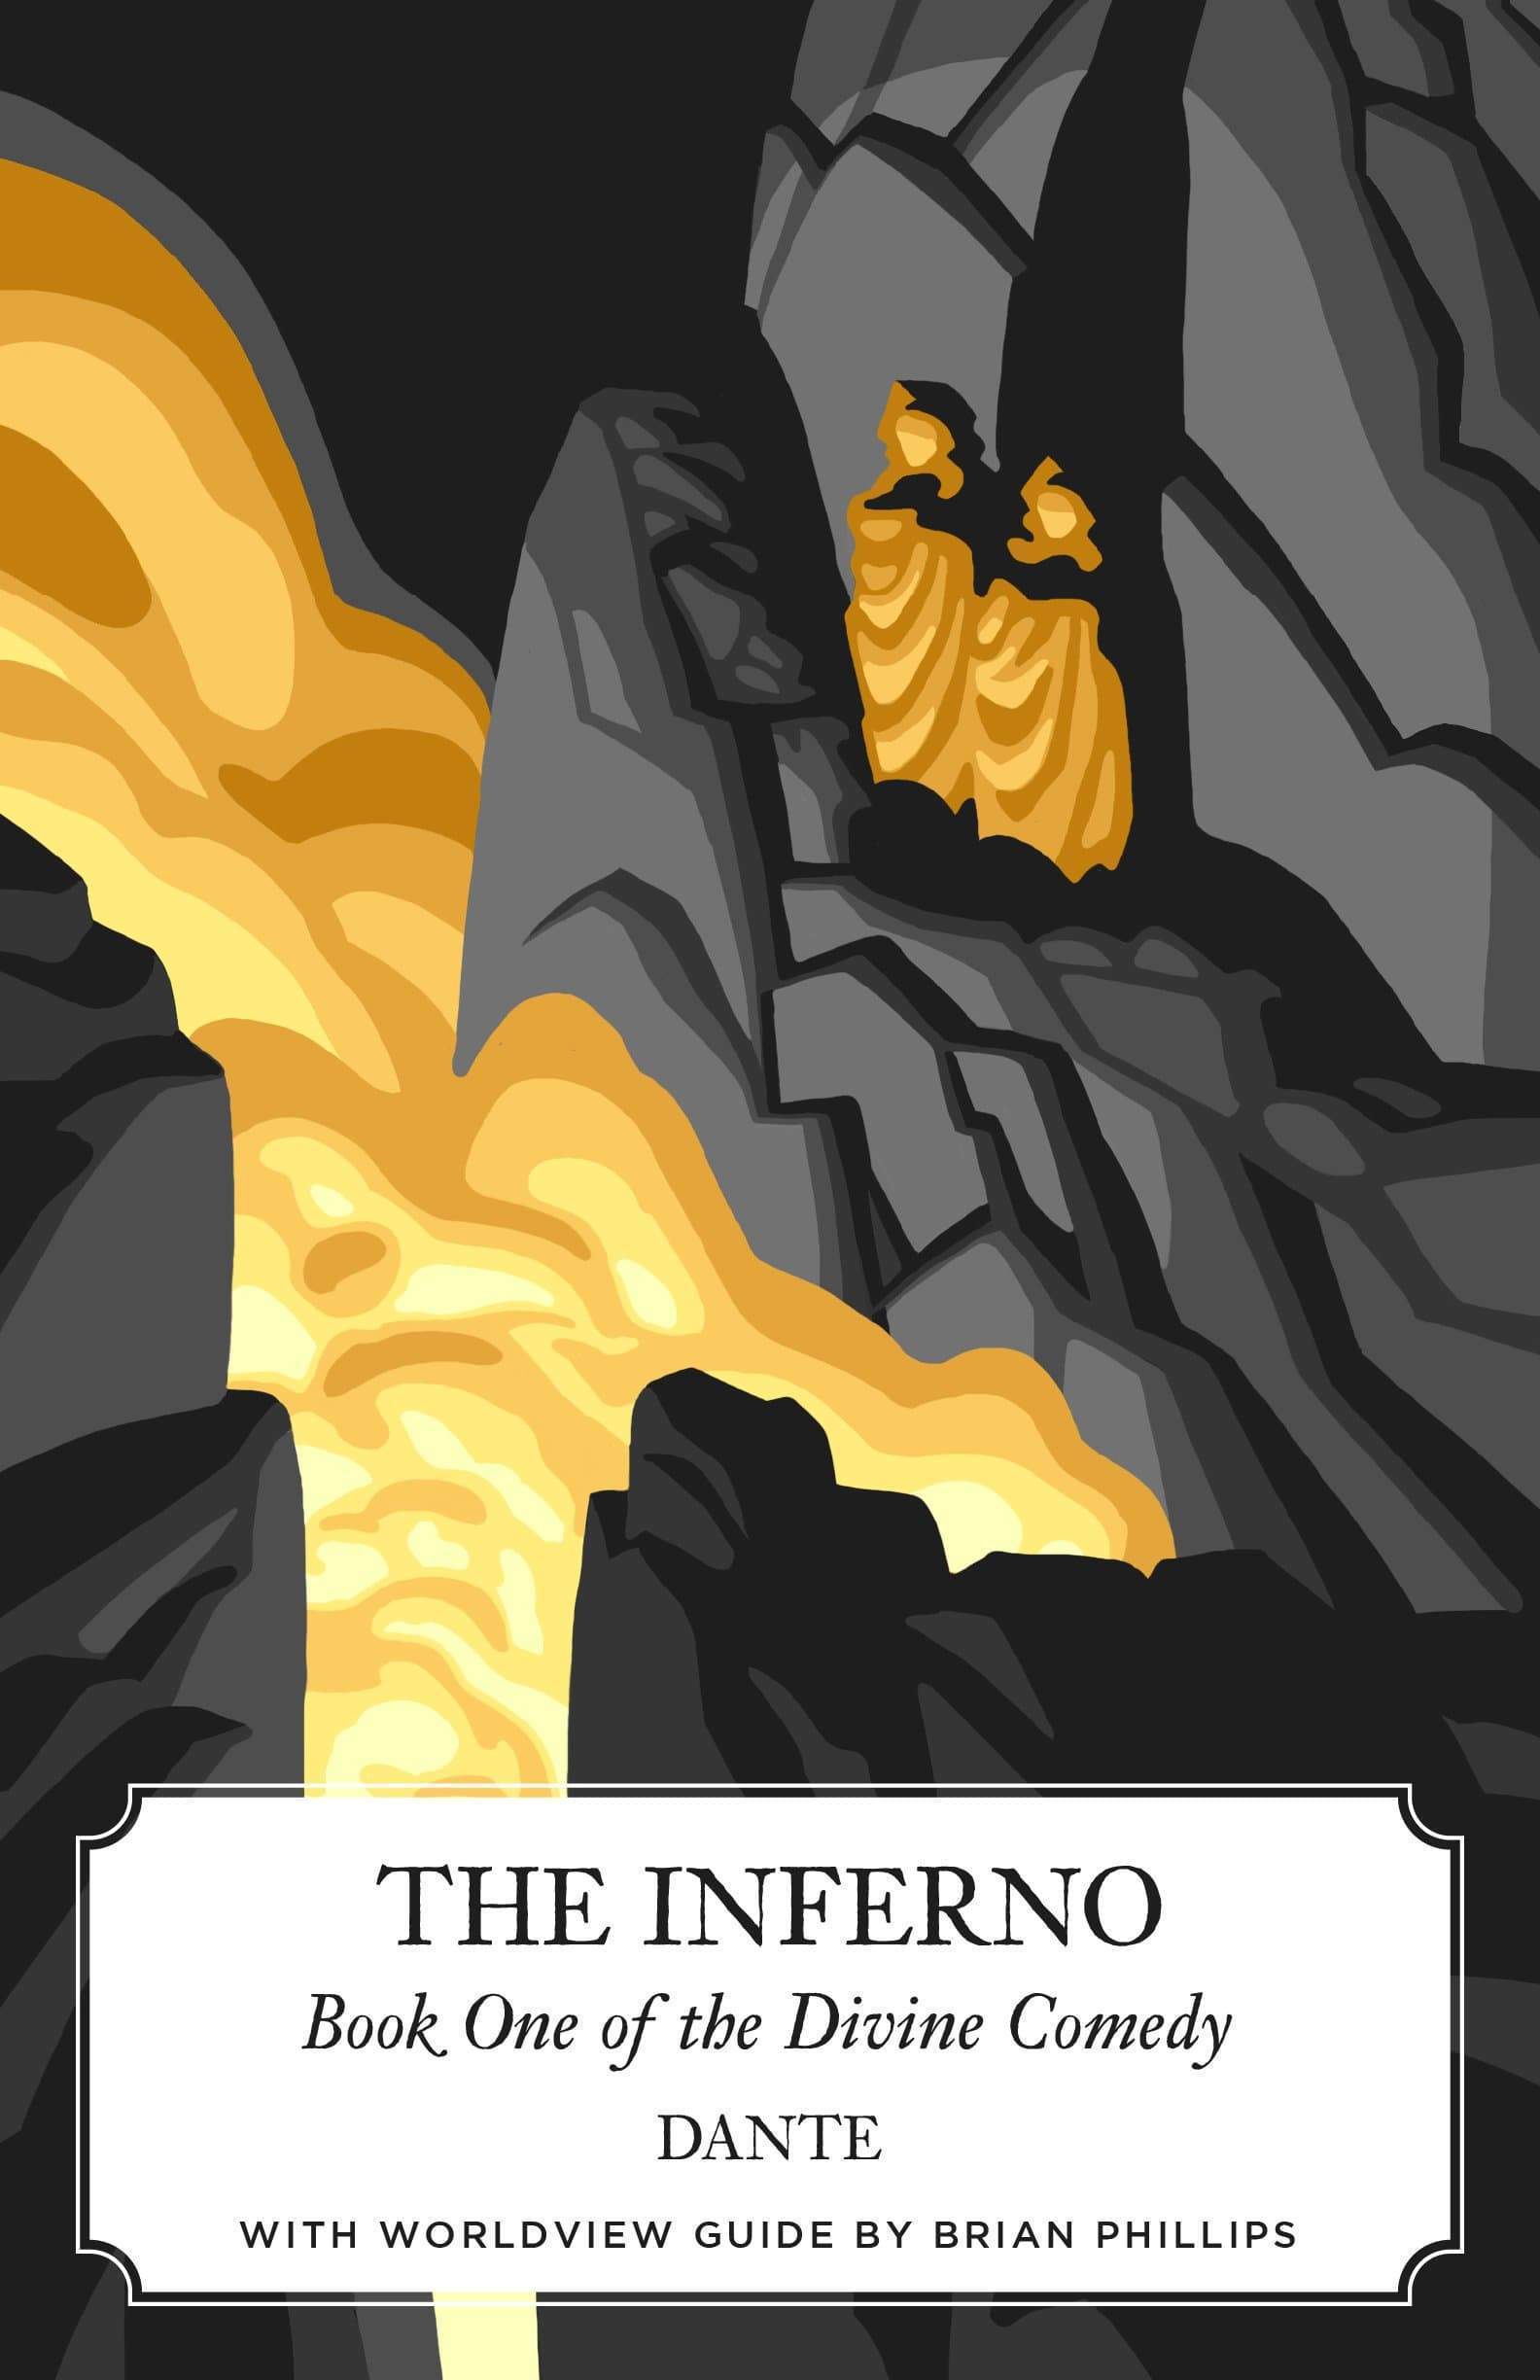 Dante's 'Inferno' is a journey to hell and back